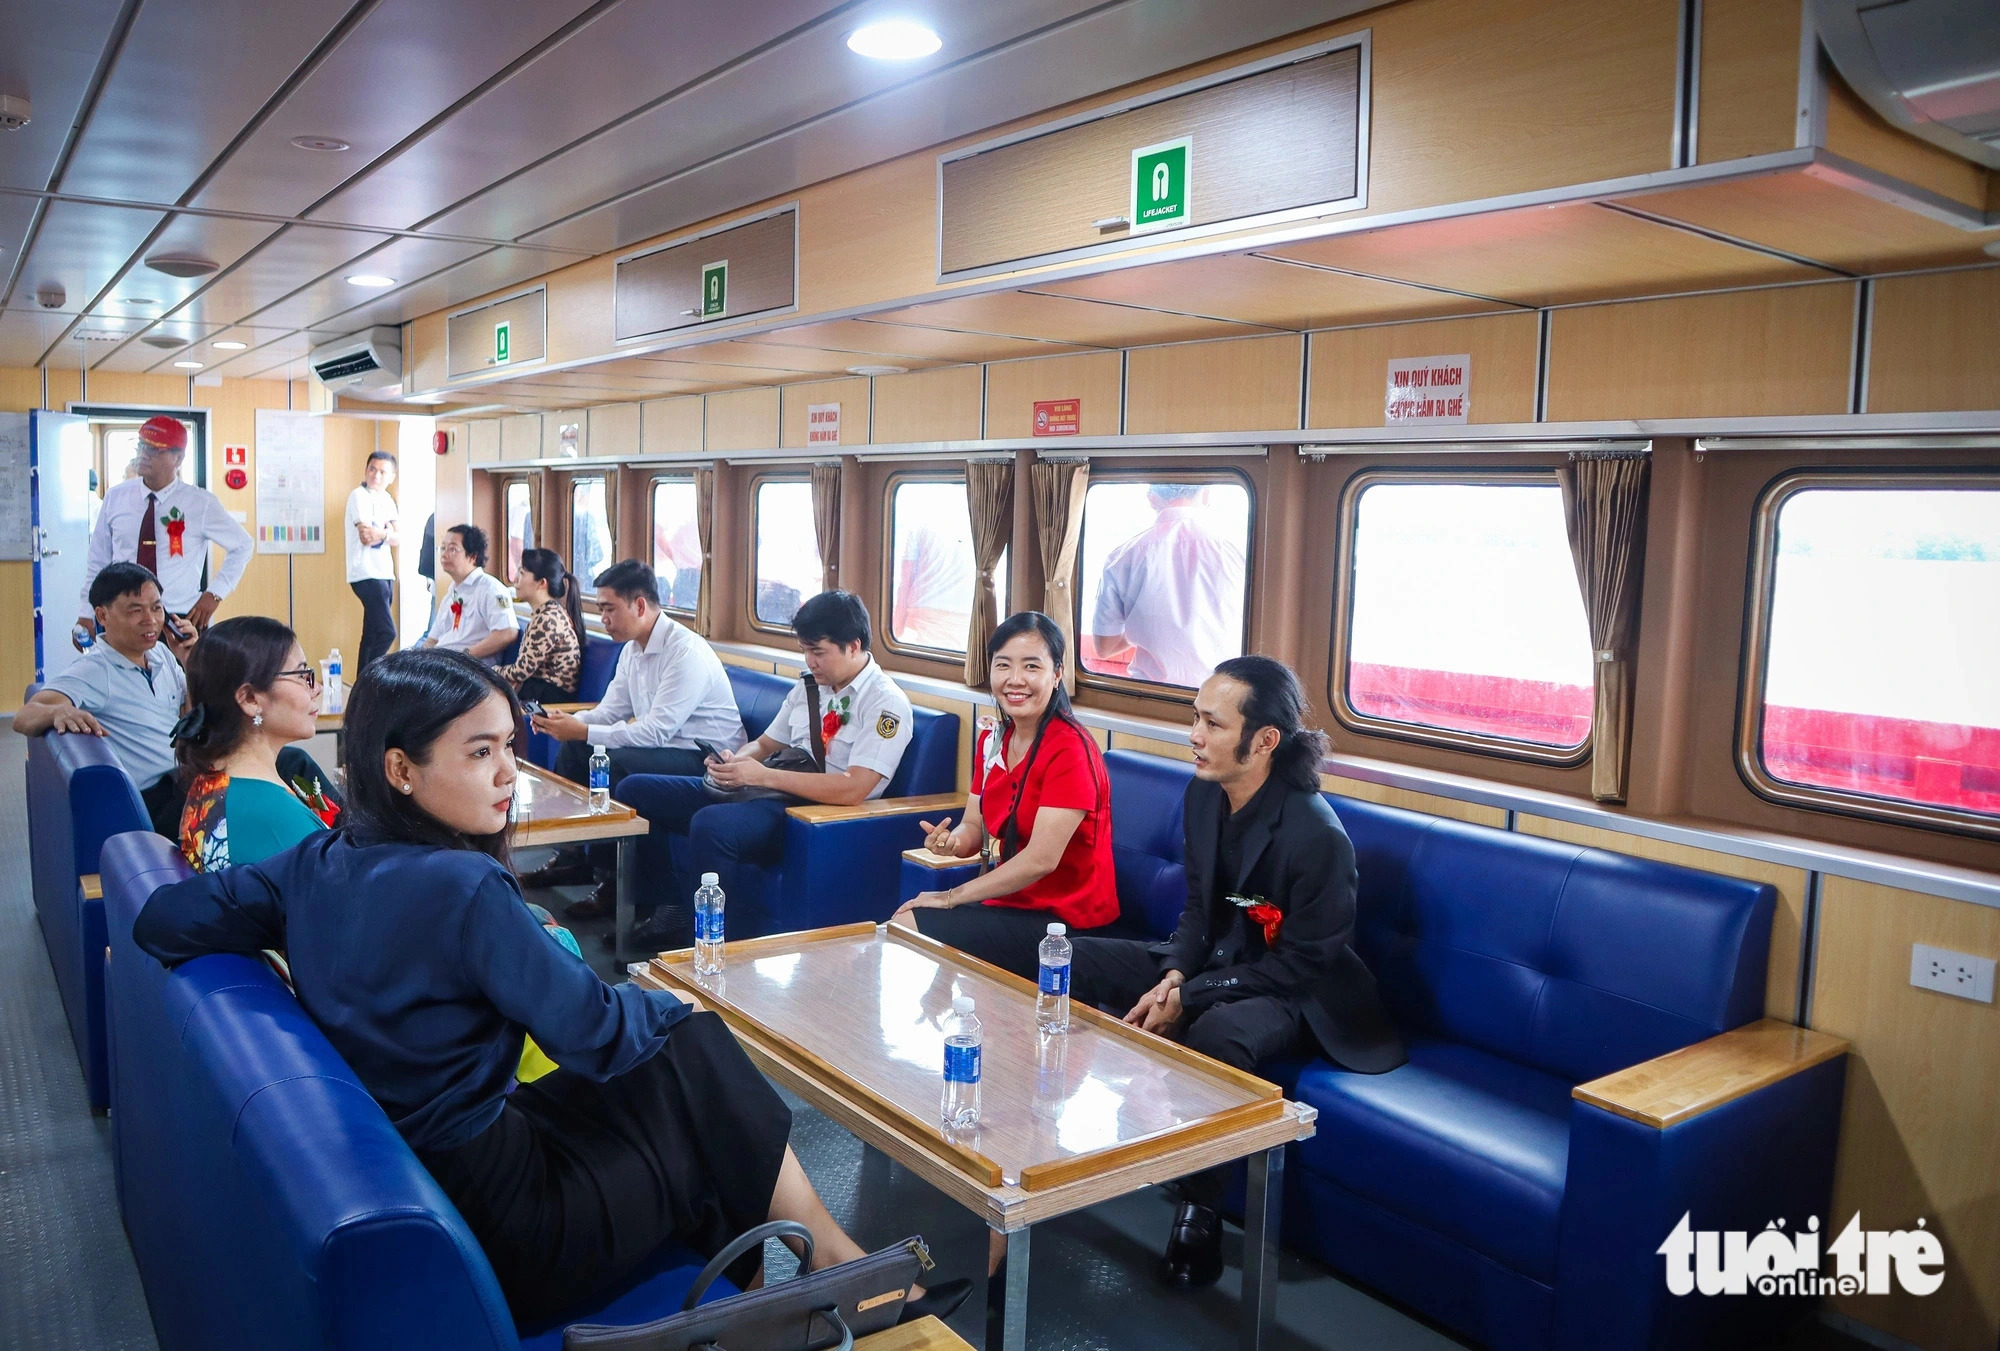 The second floor of the speedboat houses a canteen. Photo: Thu Dung / Tuoi Tre